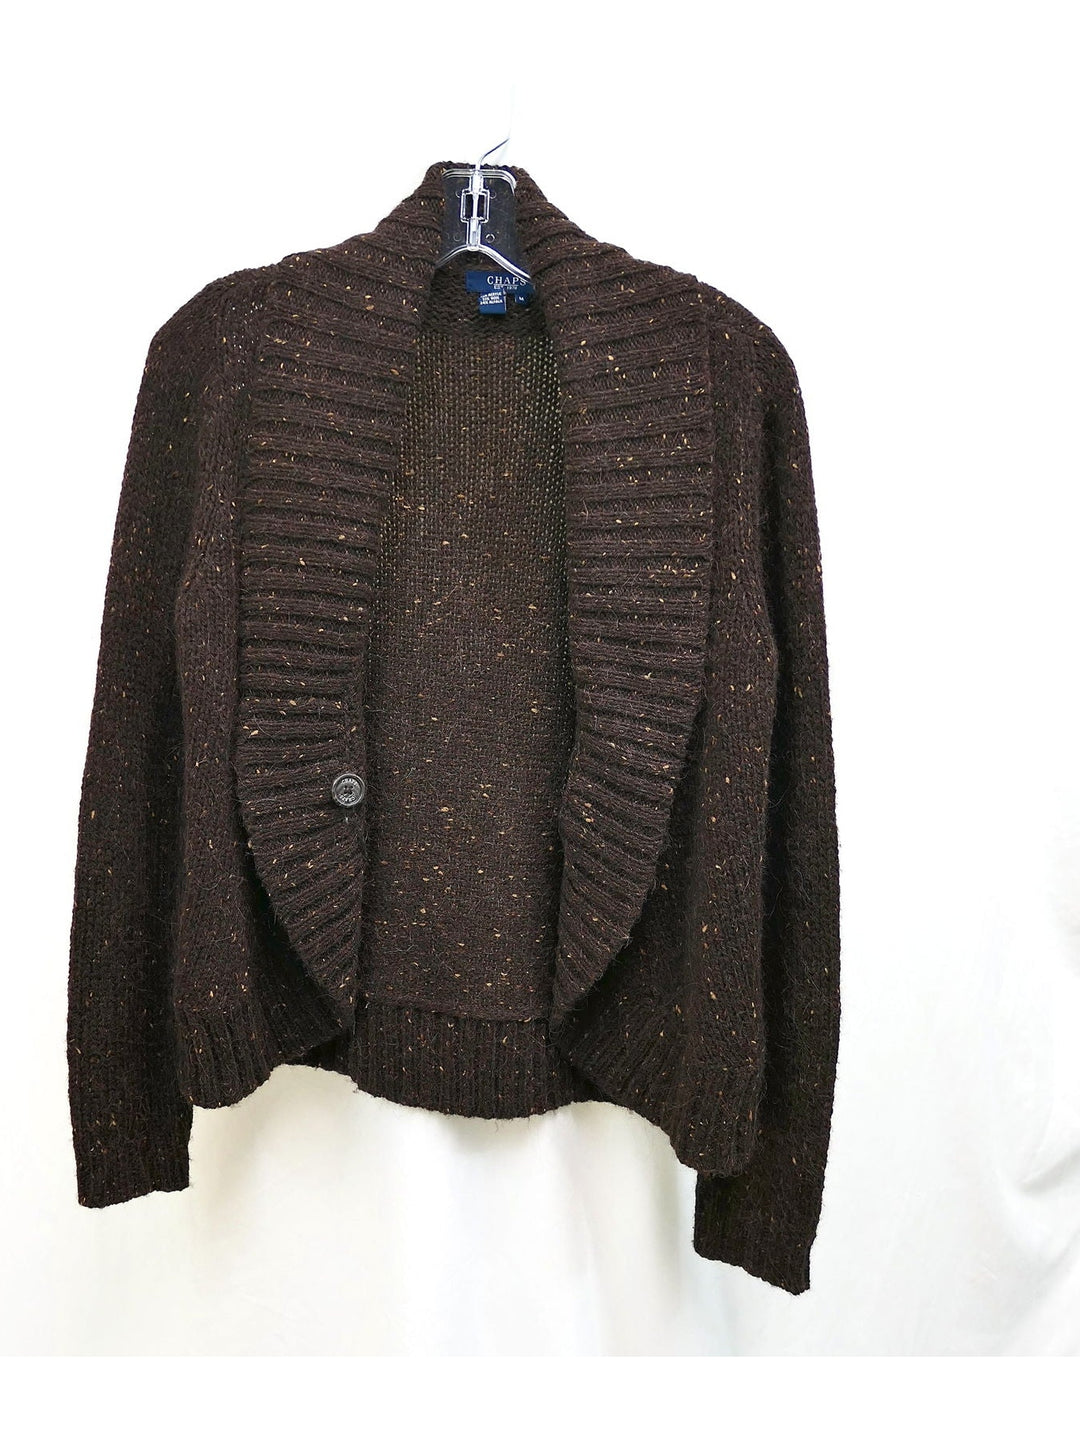 Chaps Brown Knit Sweater - Size M - The Kennedy Collective Thrift - 